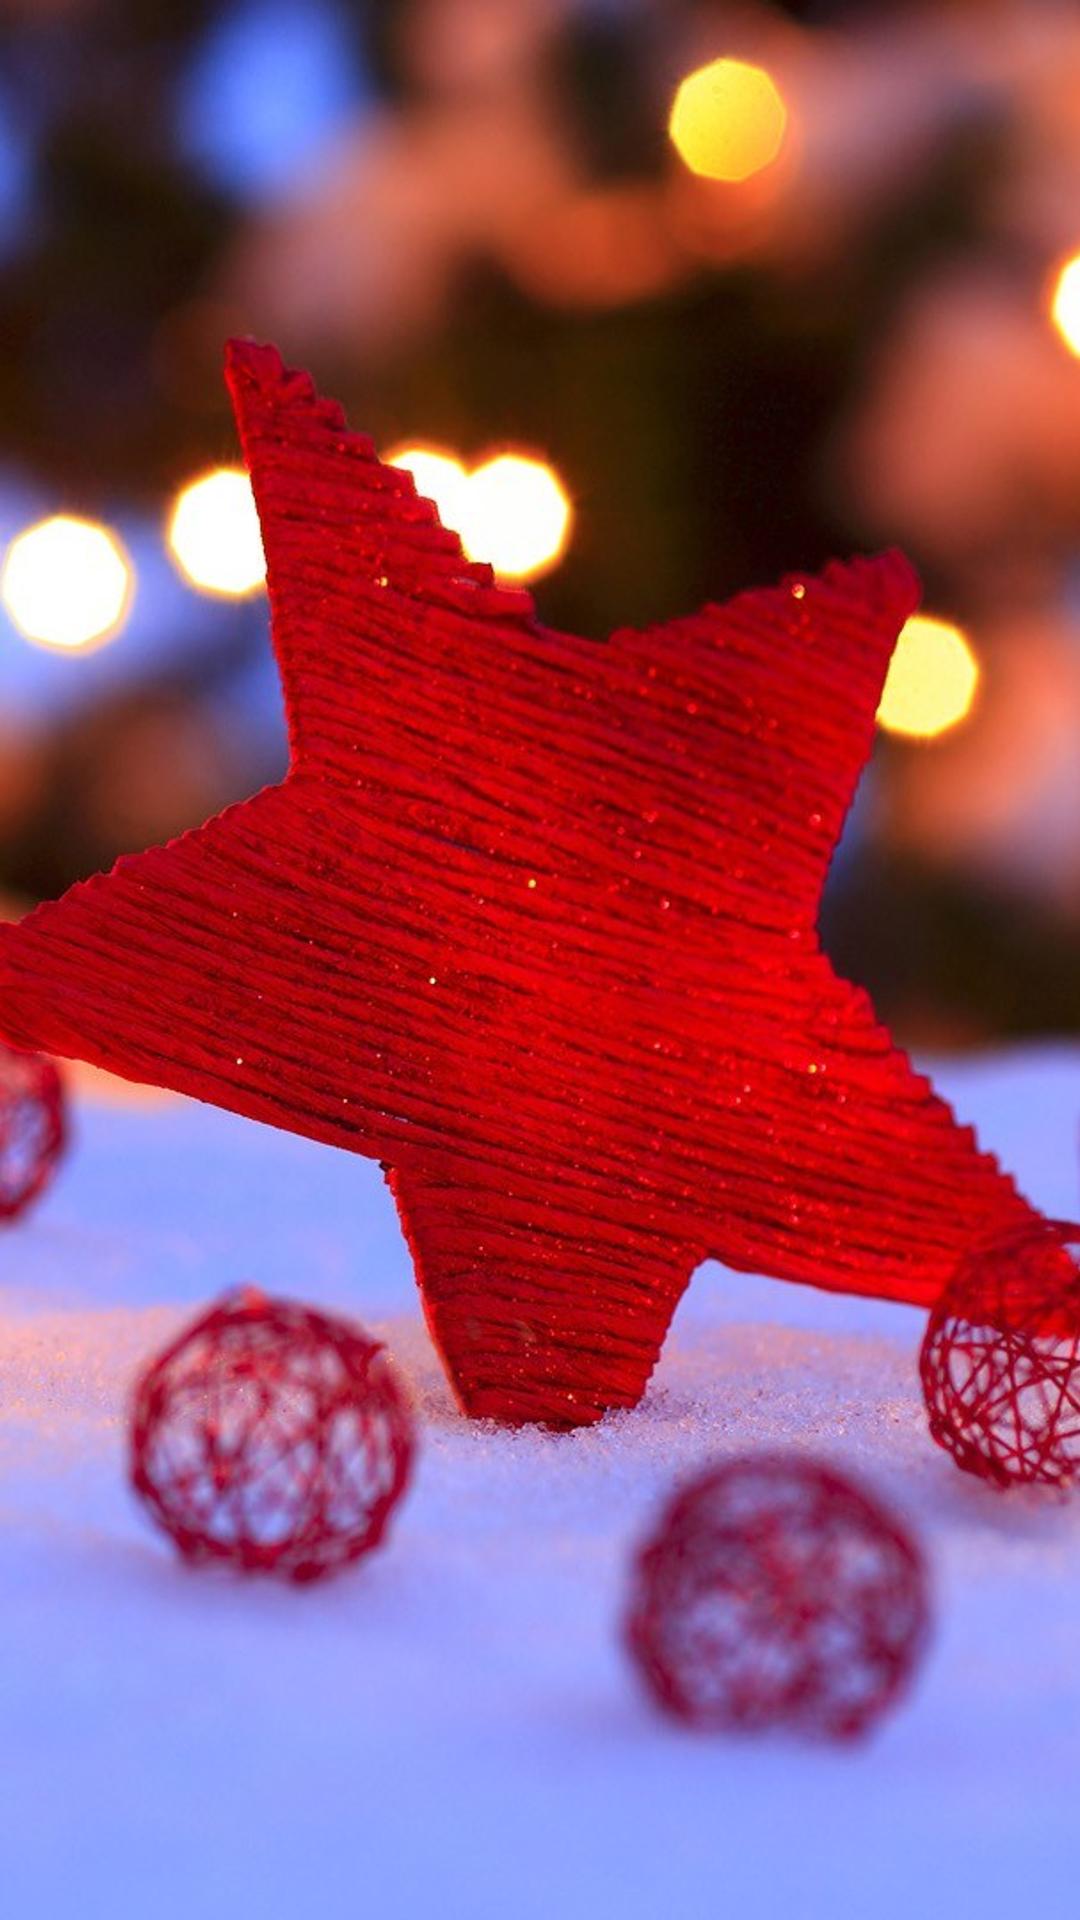 Red Christmas star and accessories - Winter HD wallpaper